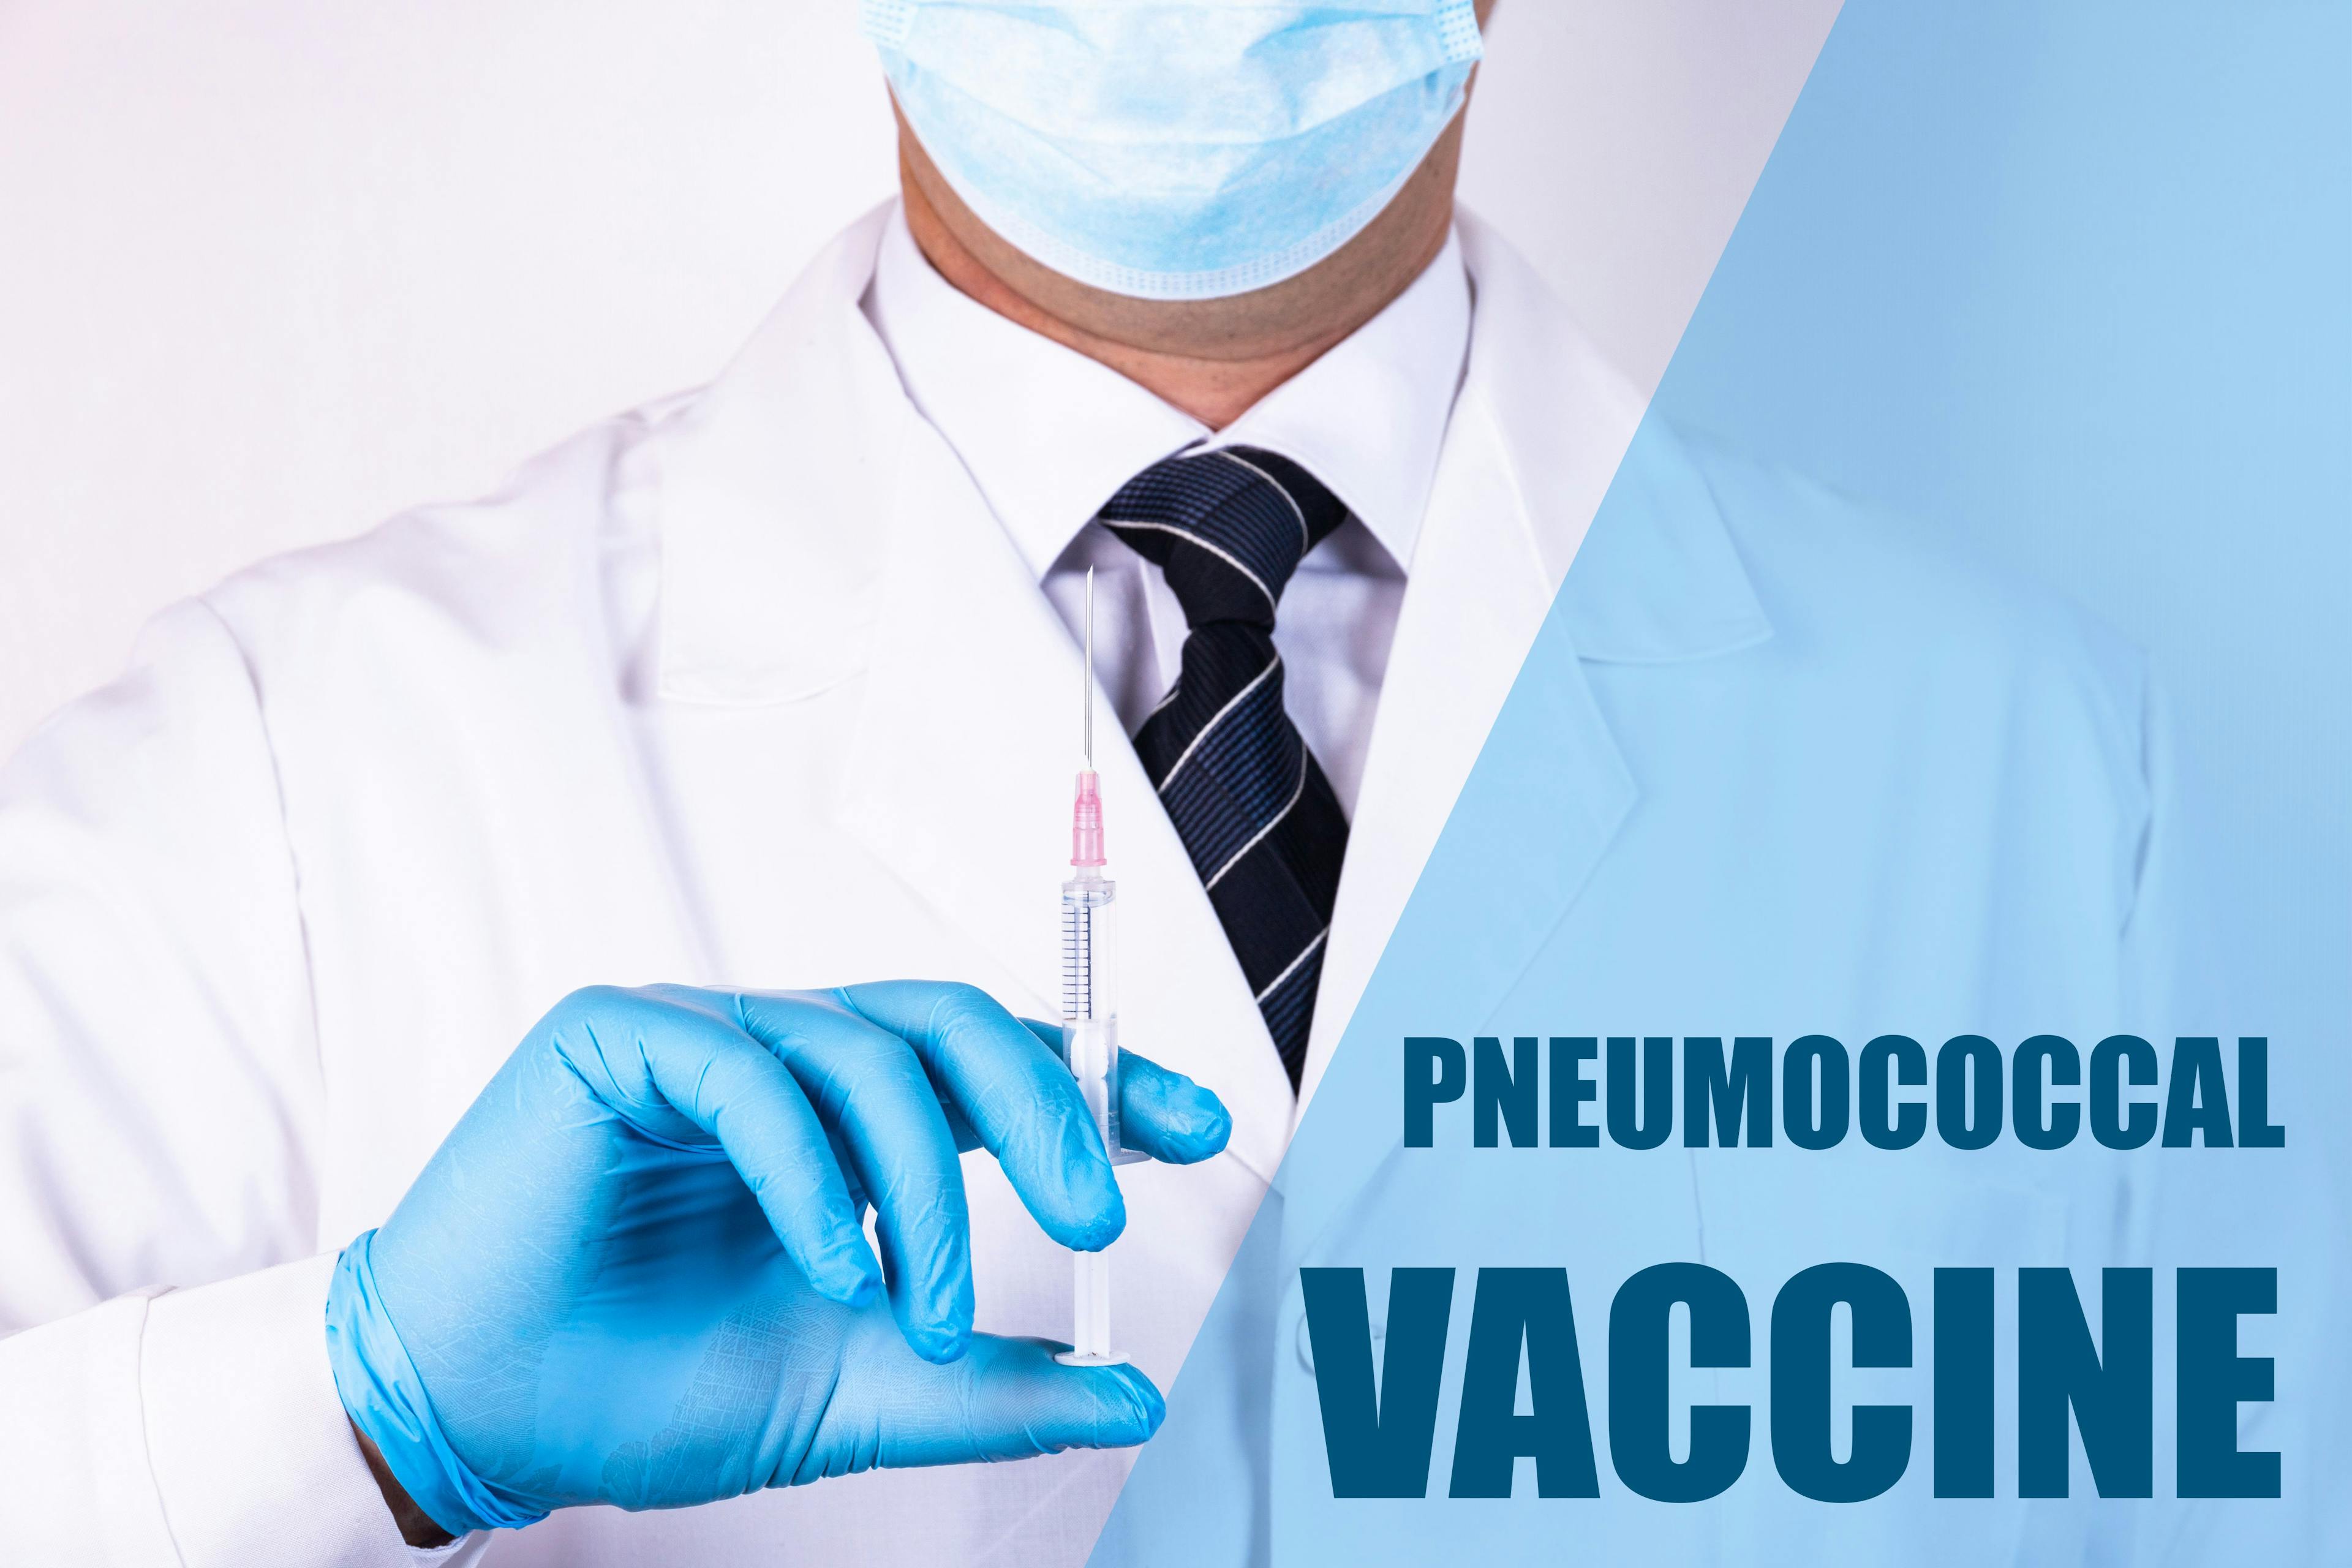 The 24-valent investigational pneumococcal conjugate vaccine, VAX-24, met its primary endpoints in a phase 1/2 trial.